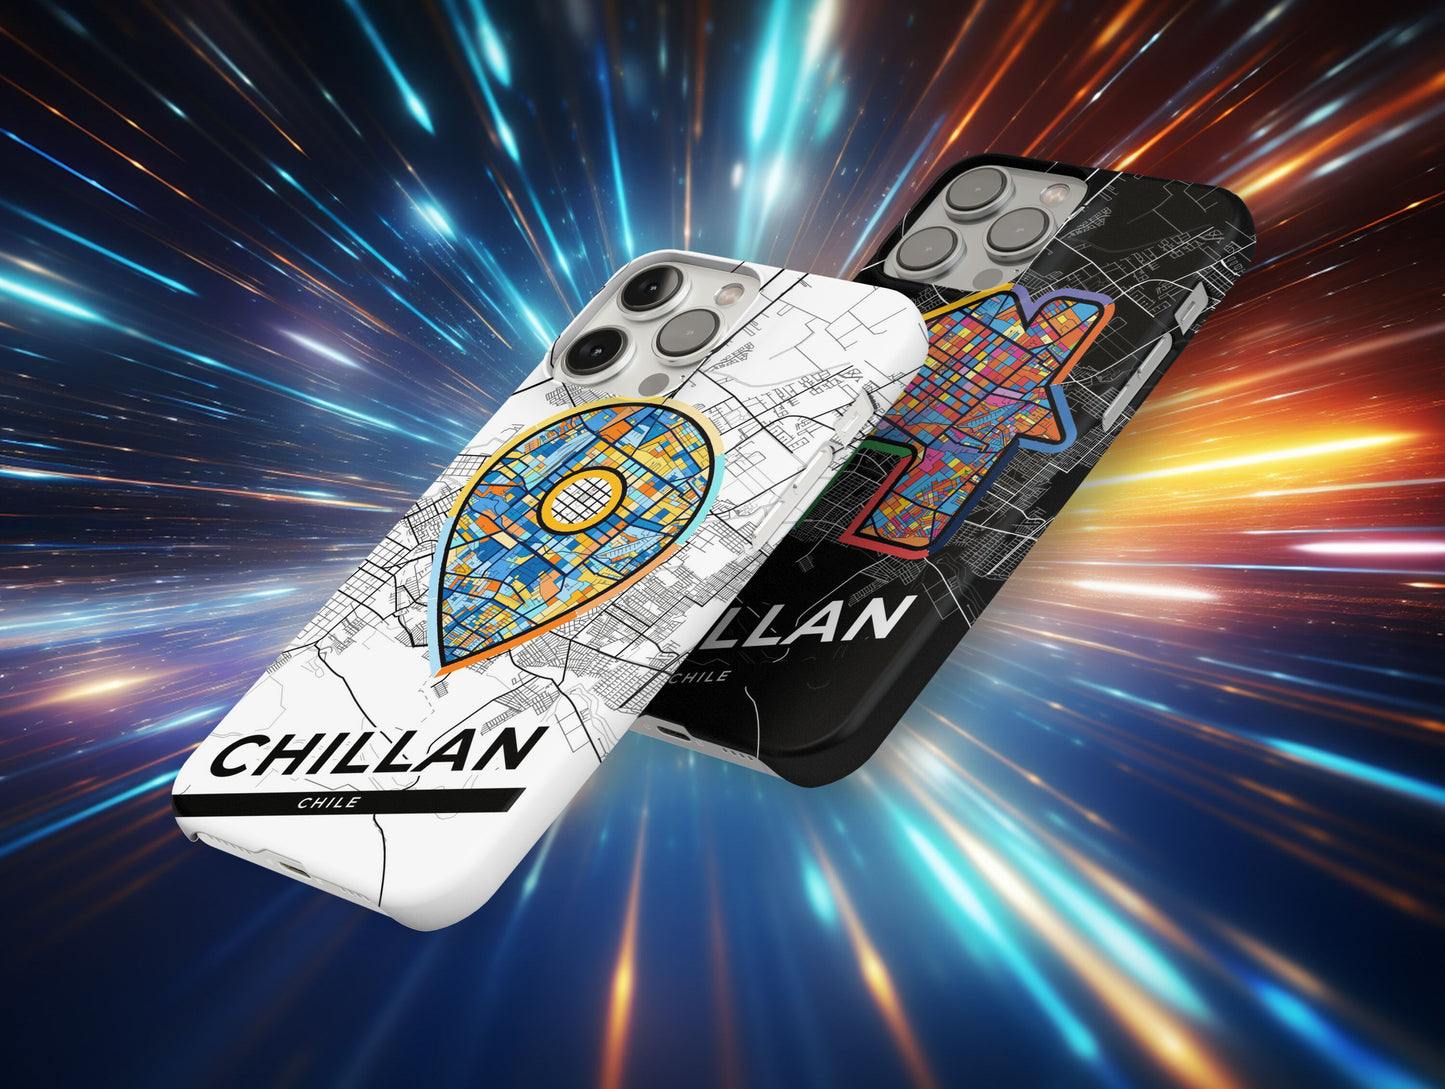 Chillan Chile slim phone case with colorful icon. Birthday, wedding or housewarming gift. Couple match cases.